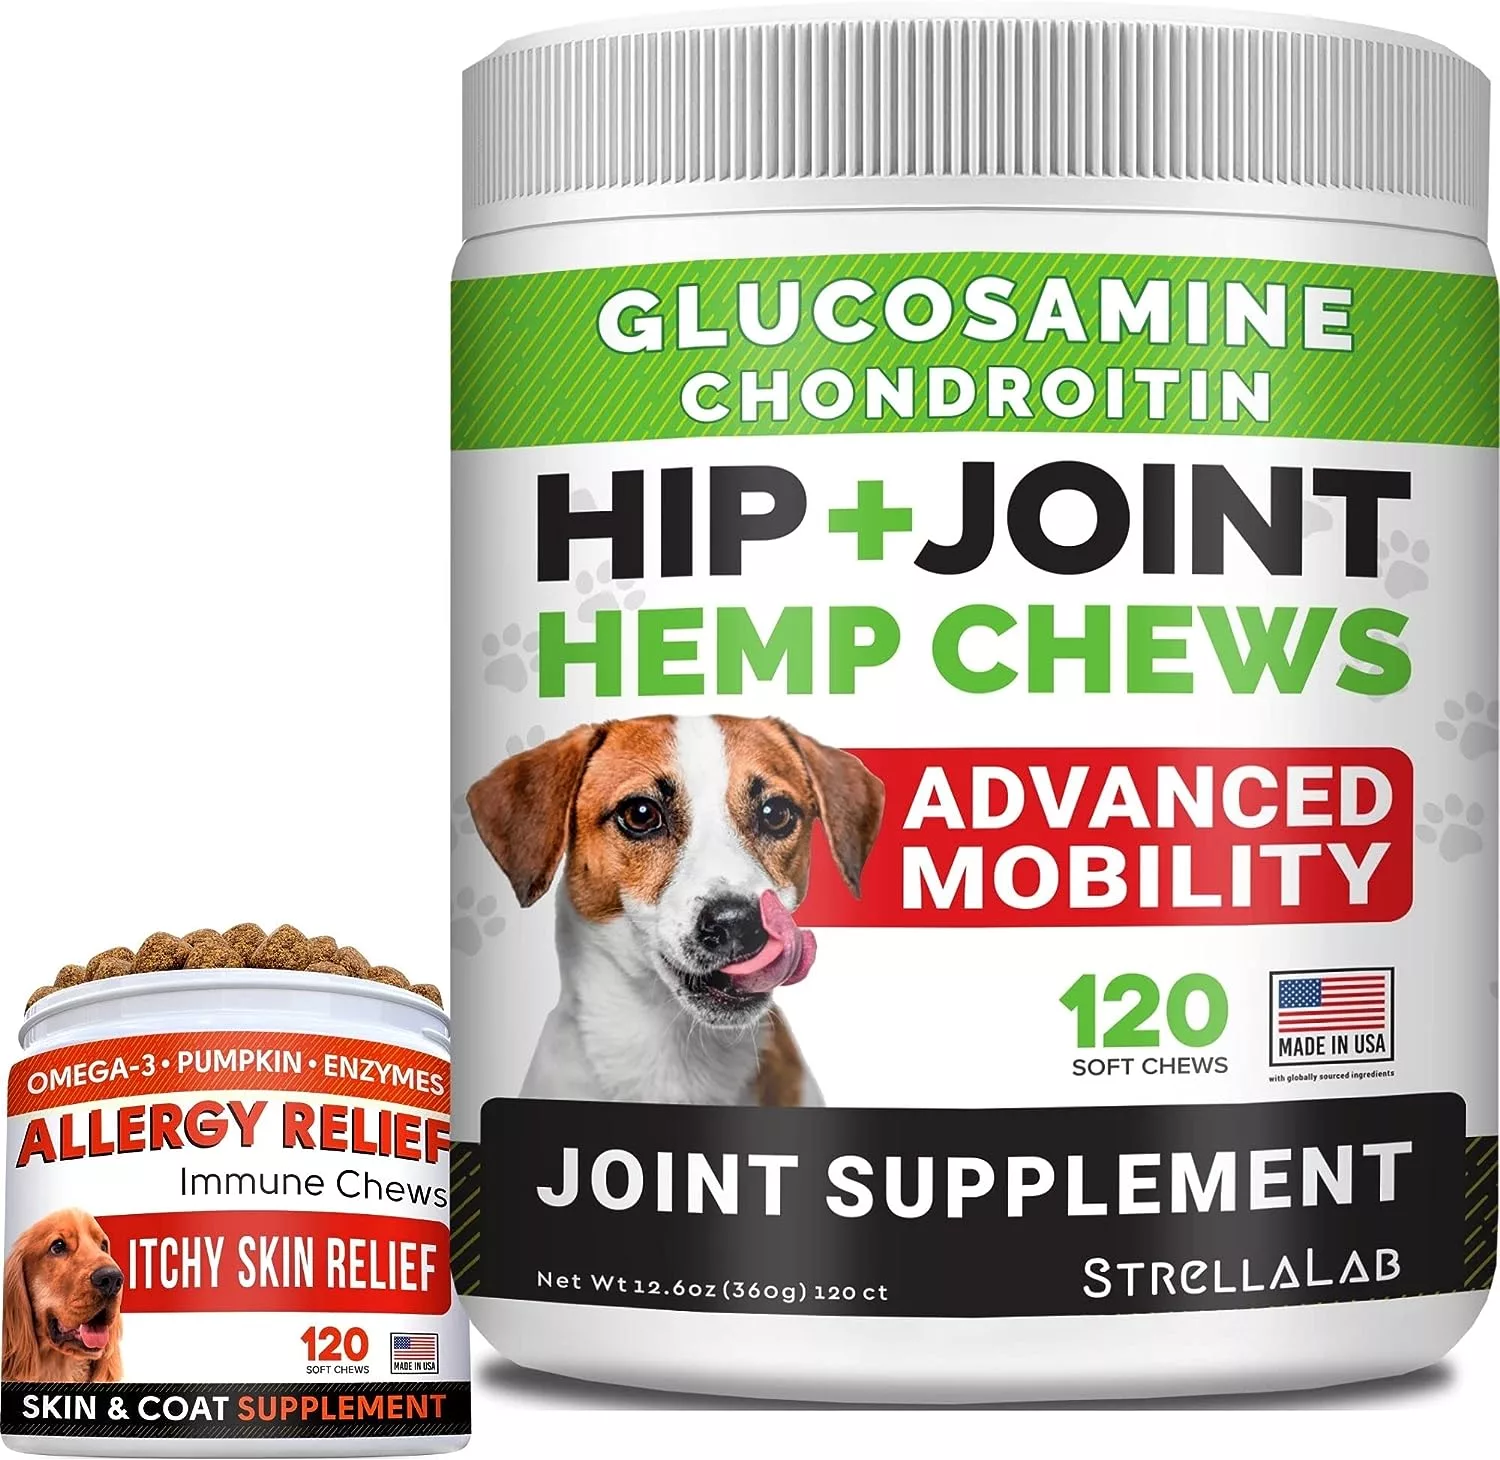 Hemp + Glucosamine Dog Joint Supplement + Allergy Relief Treats w/Omega 3 Bundle - Hip  Joint Care + Itchy Skin Relief - Chondroitin, MSM + Pumpkin + Enzymes + Turmeric - 240 Chews - Made in USA